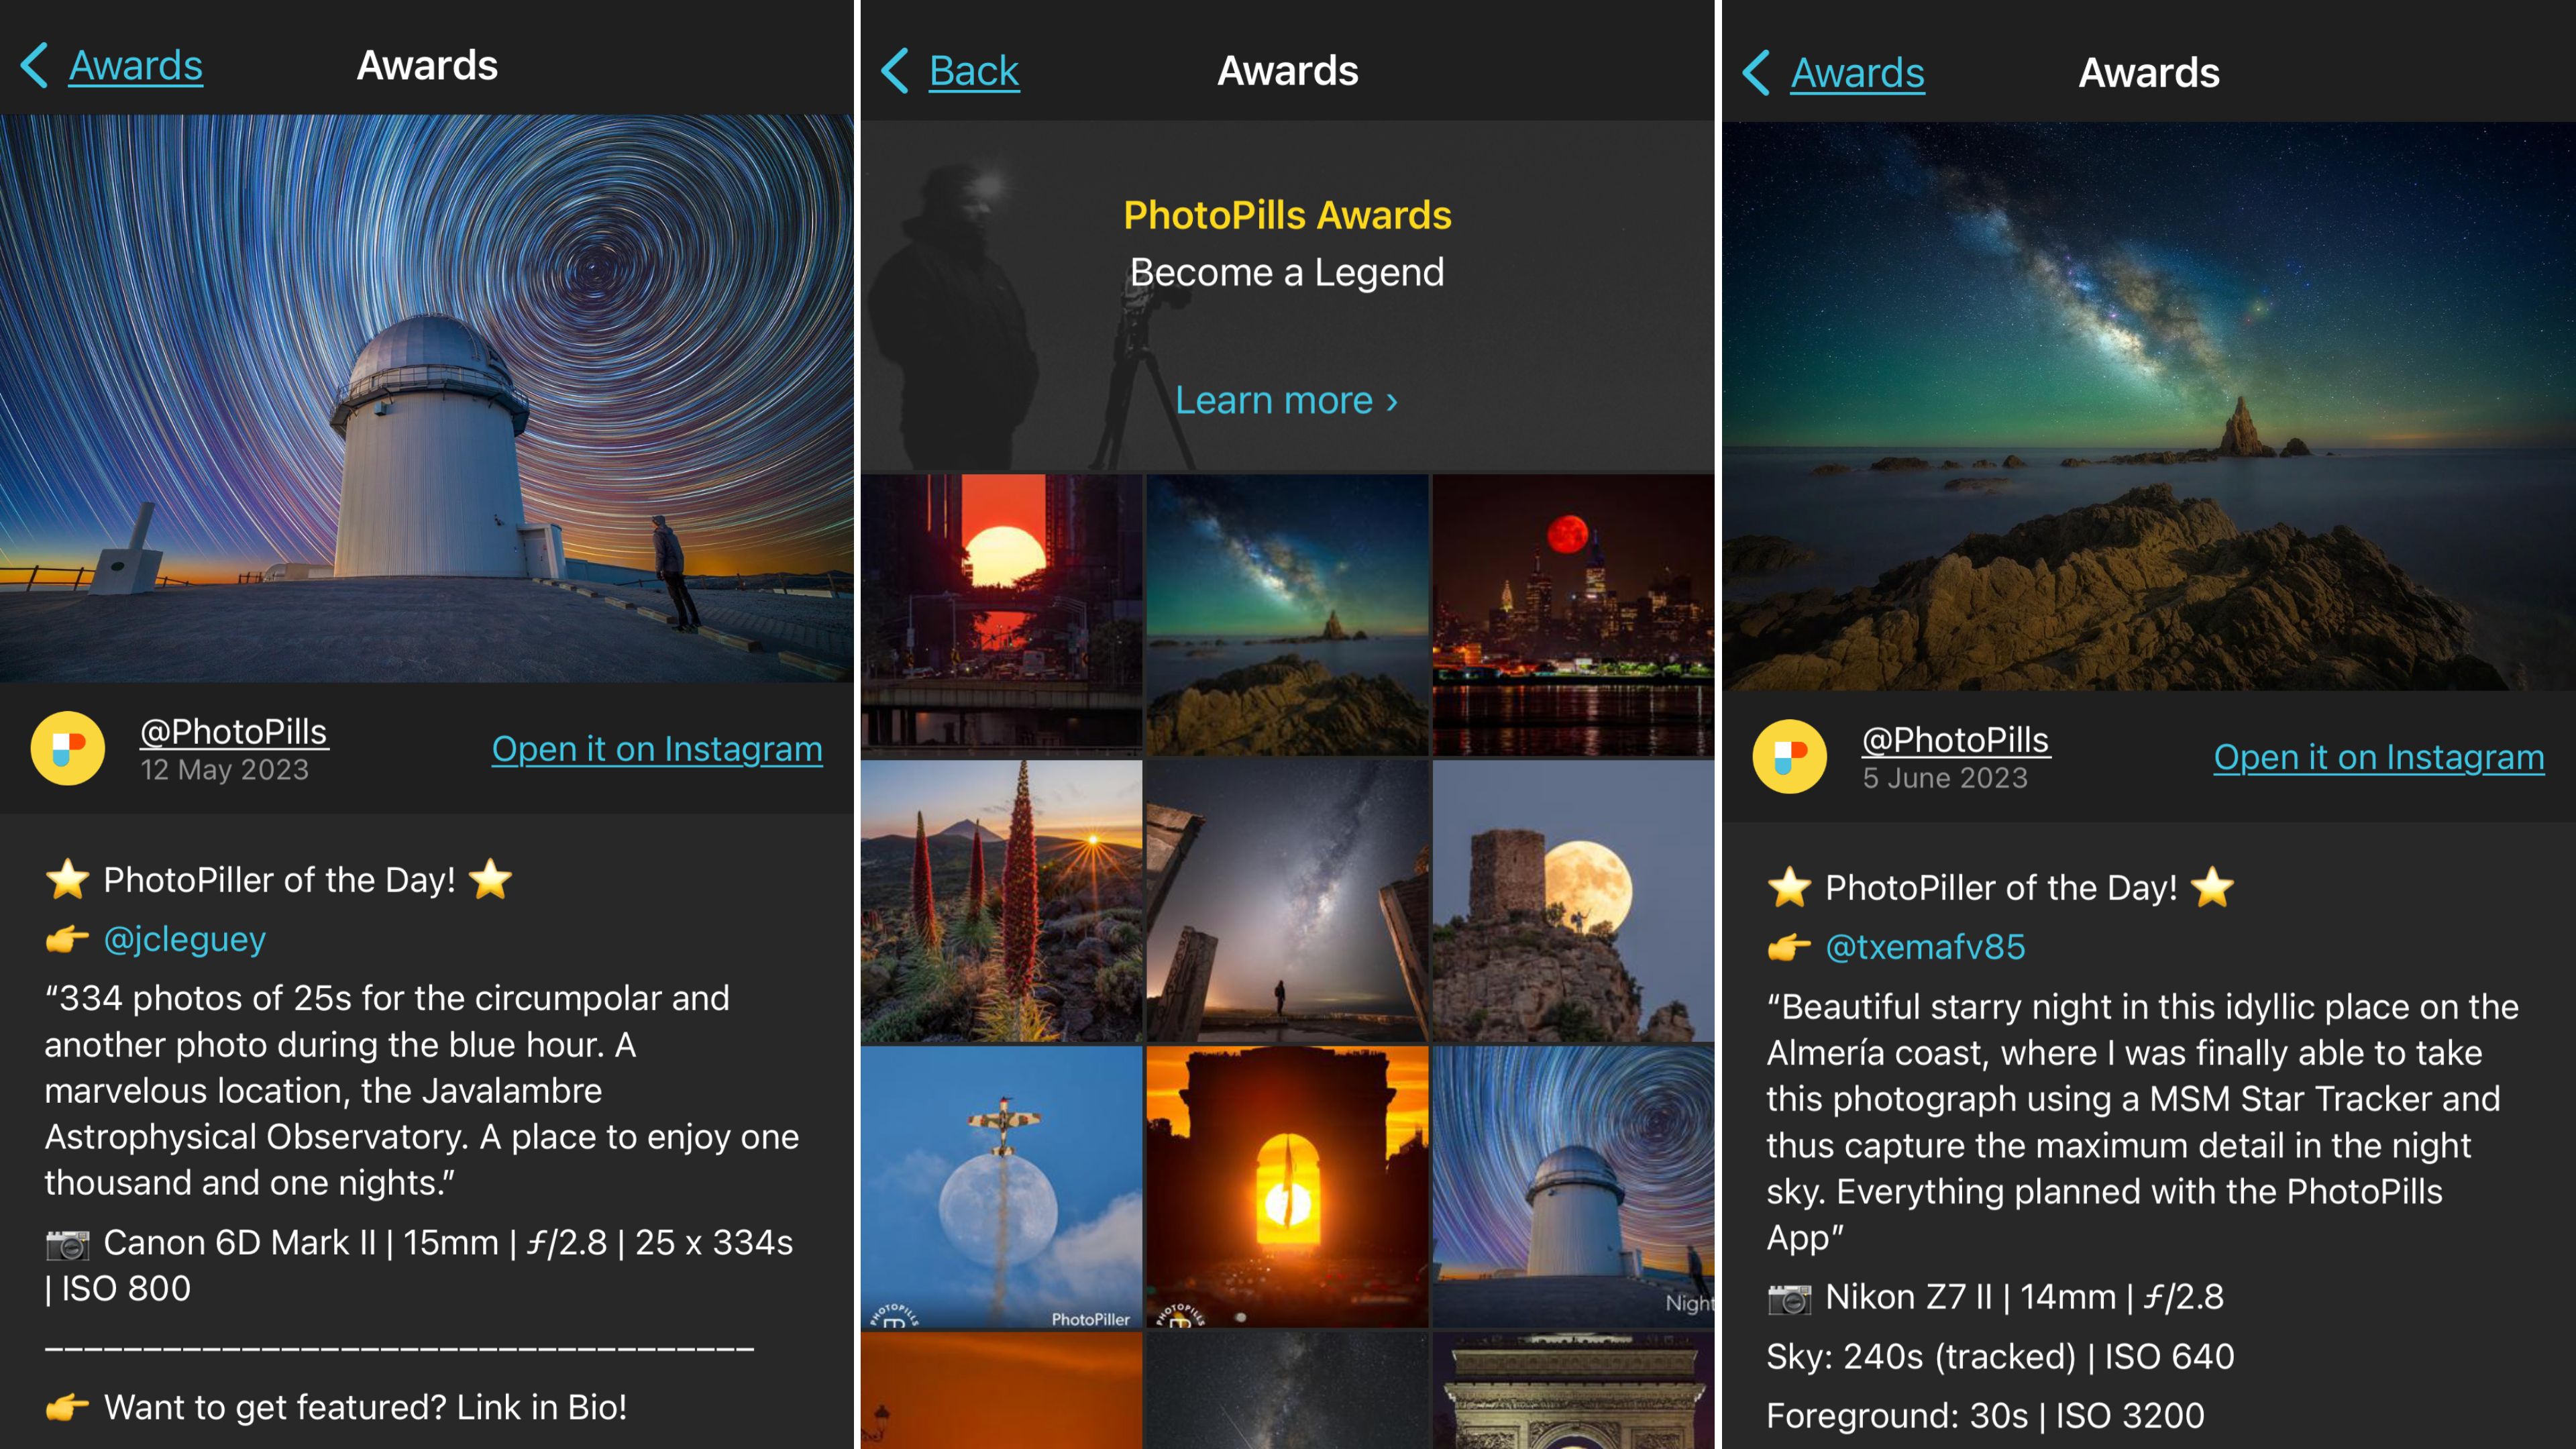 The Academy area of the app, showing Instagram feeds featuring user photos that have won awards such as PhotoPiller of the Day